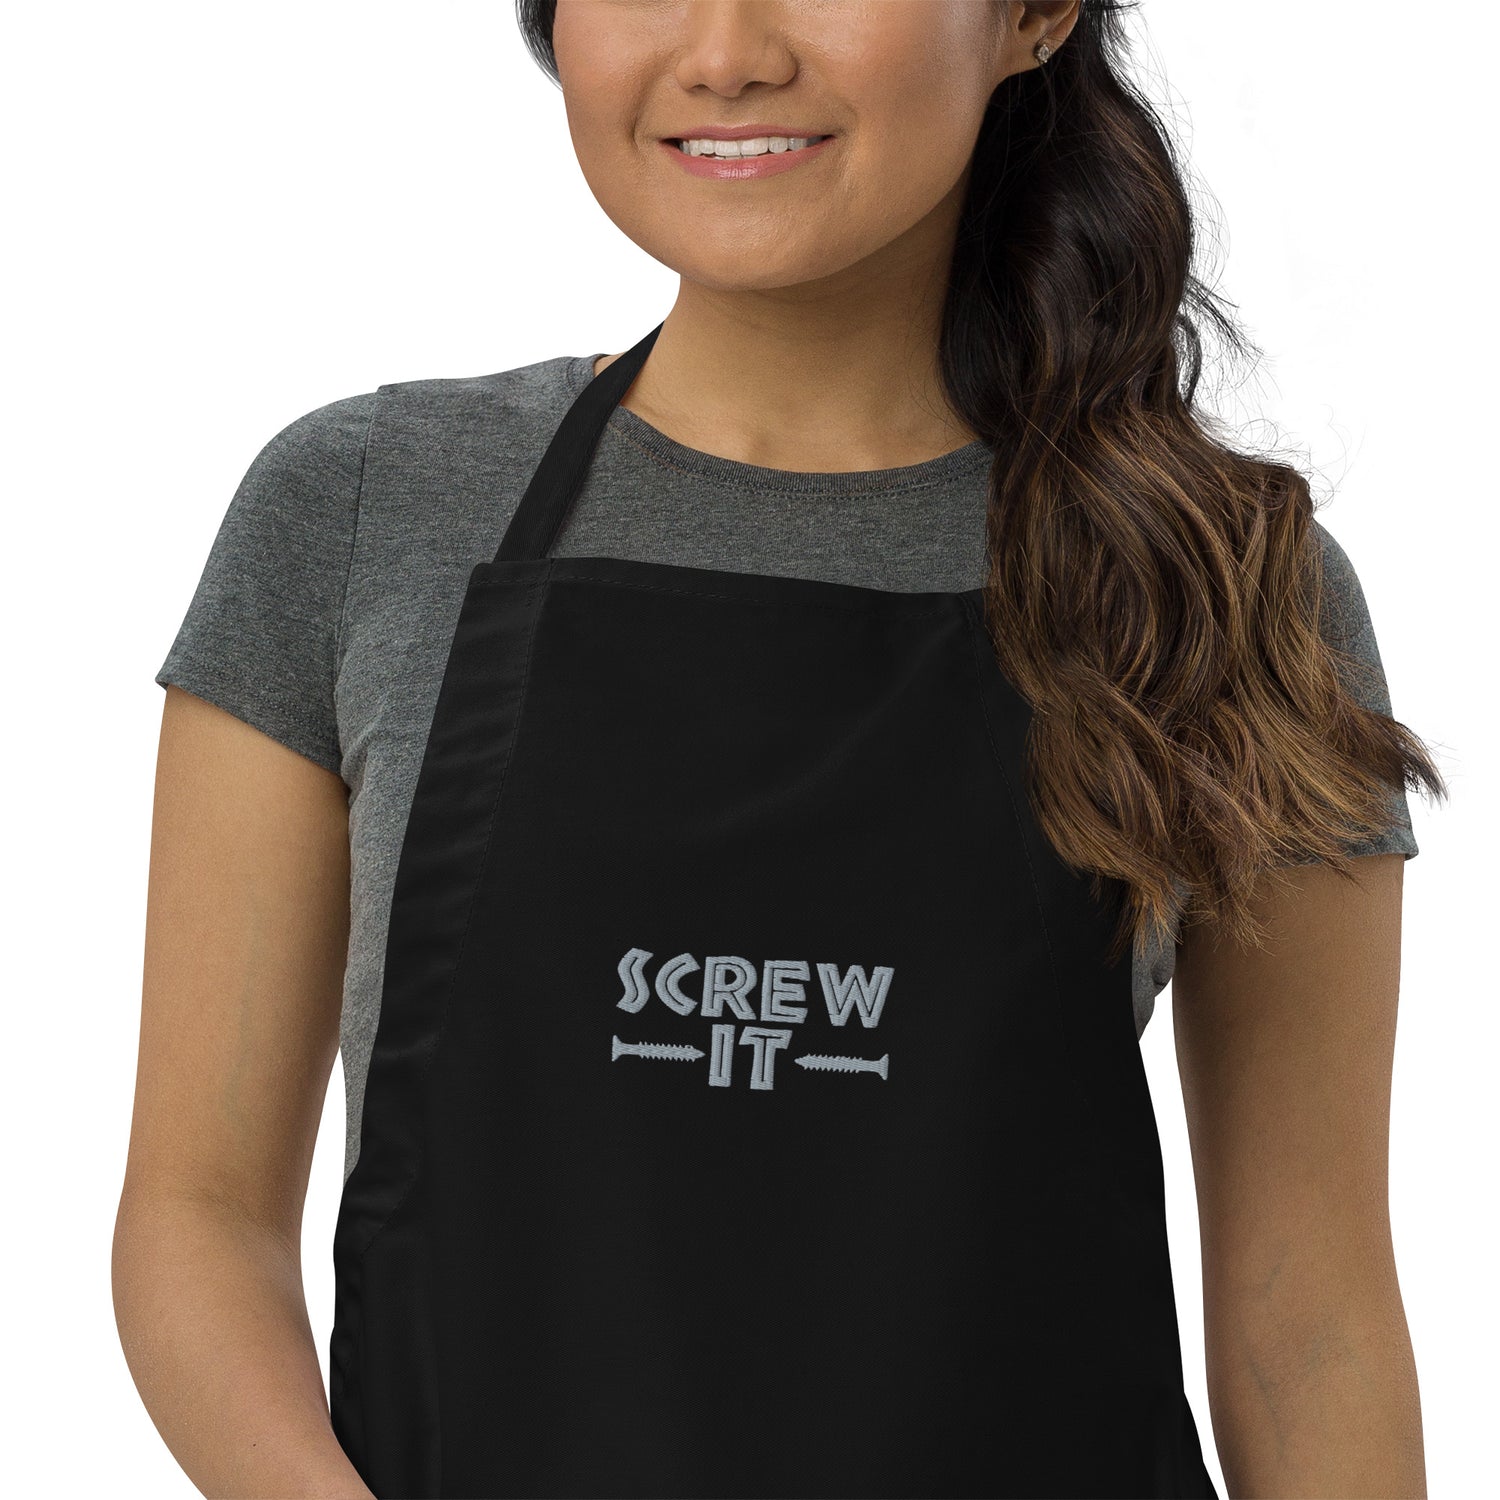 Screw It Embroidered Apron